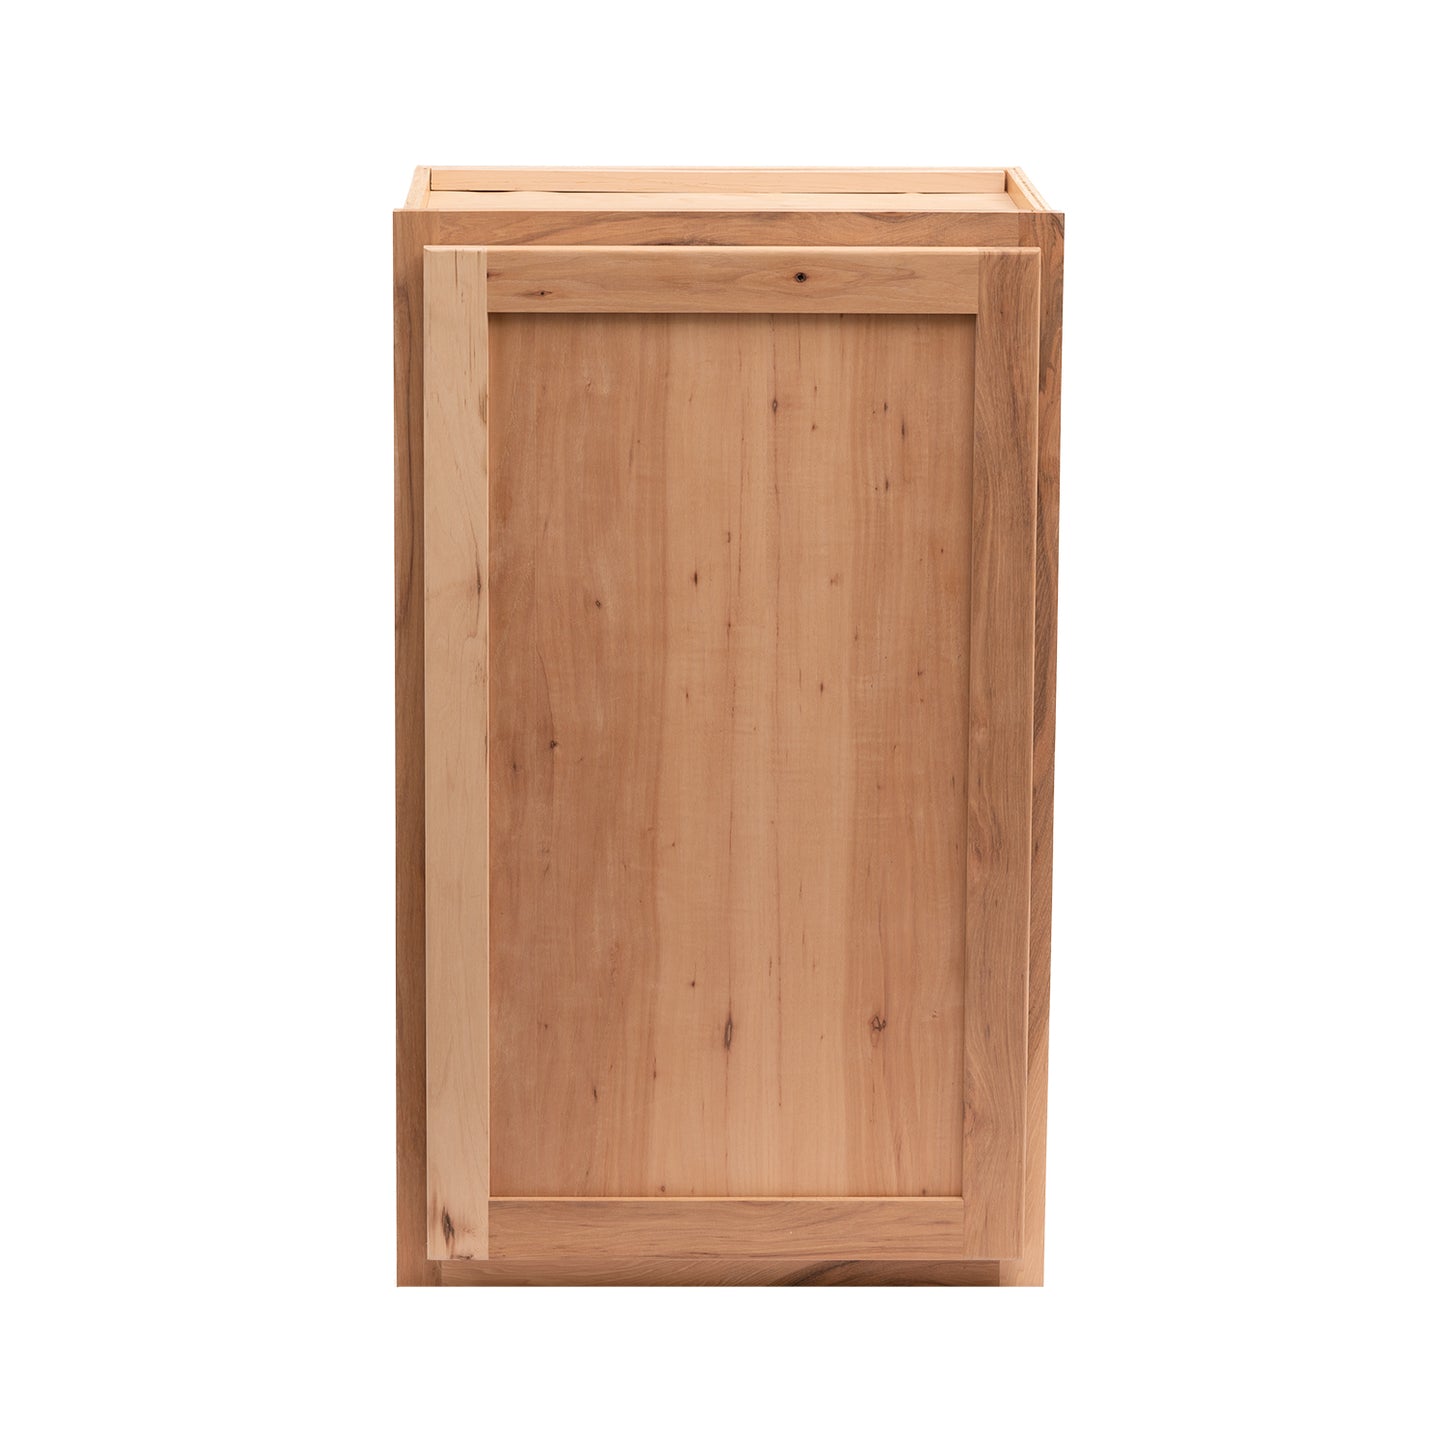 Quicklock RTA (Ready-to-Assemble) Raw Hickory Wall Cabinet- Slim 30" H